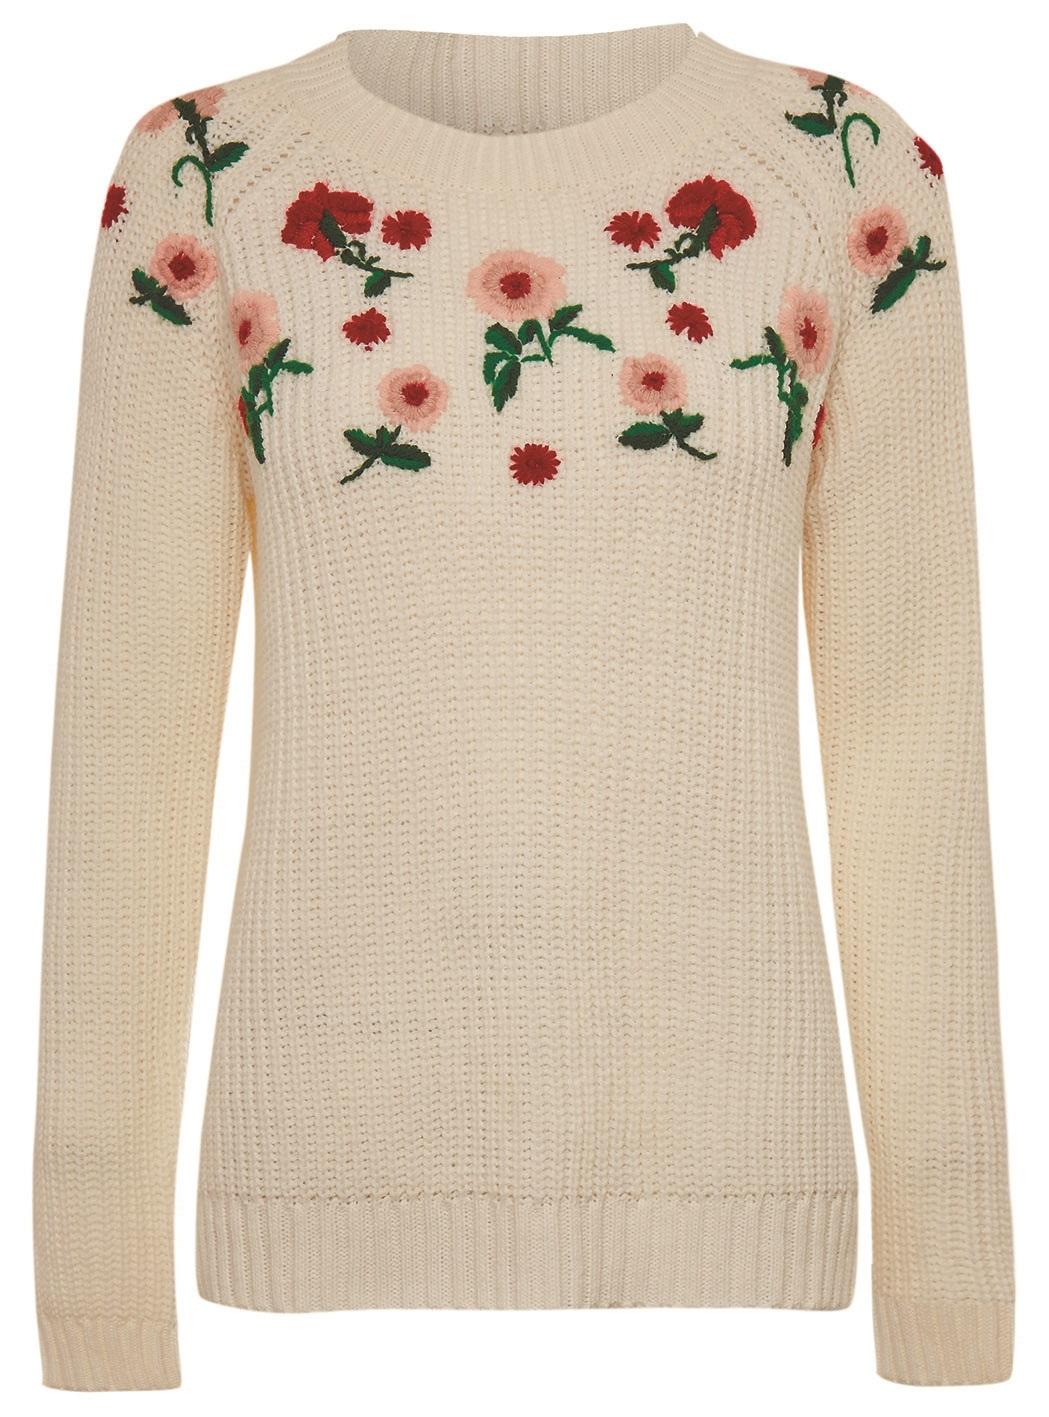 George at ASDA, White Embroidered Jumper, £16